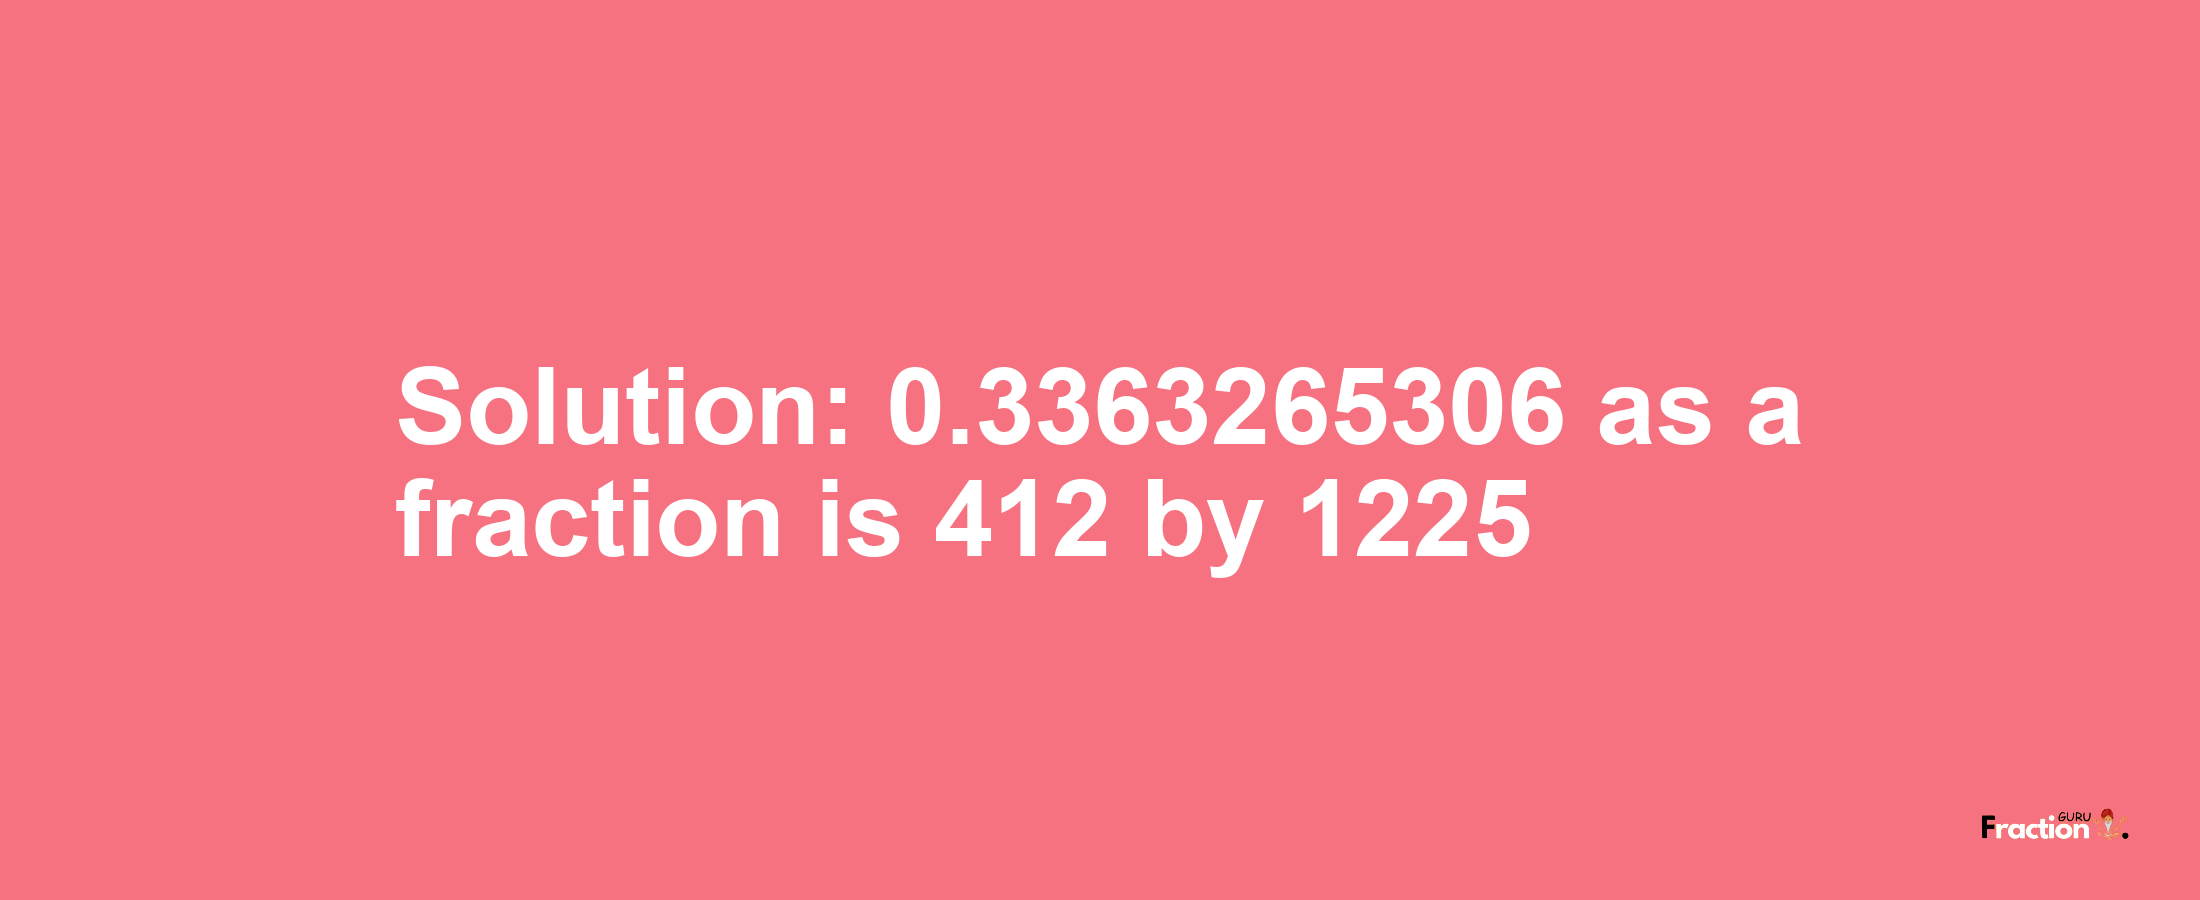 Solution:0.3363265306 as a fraction is 412/1225